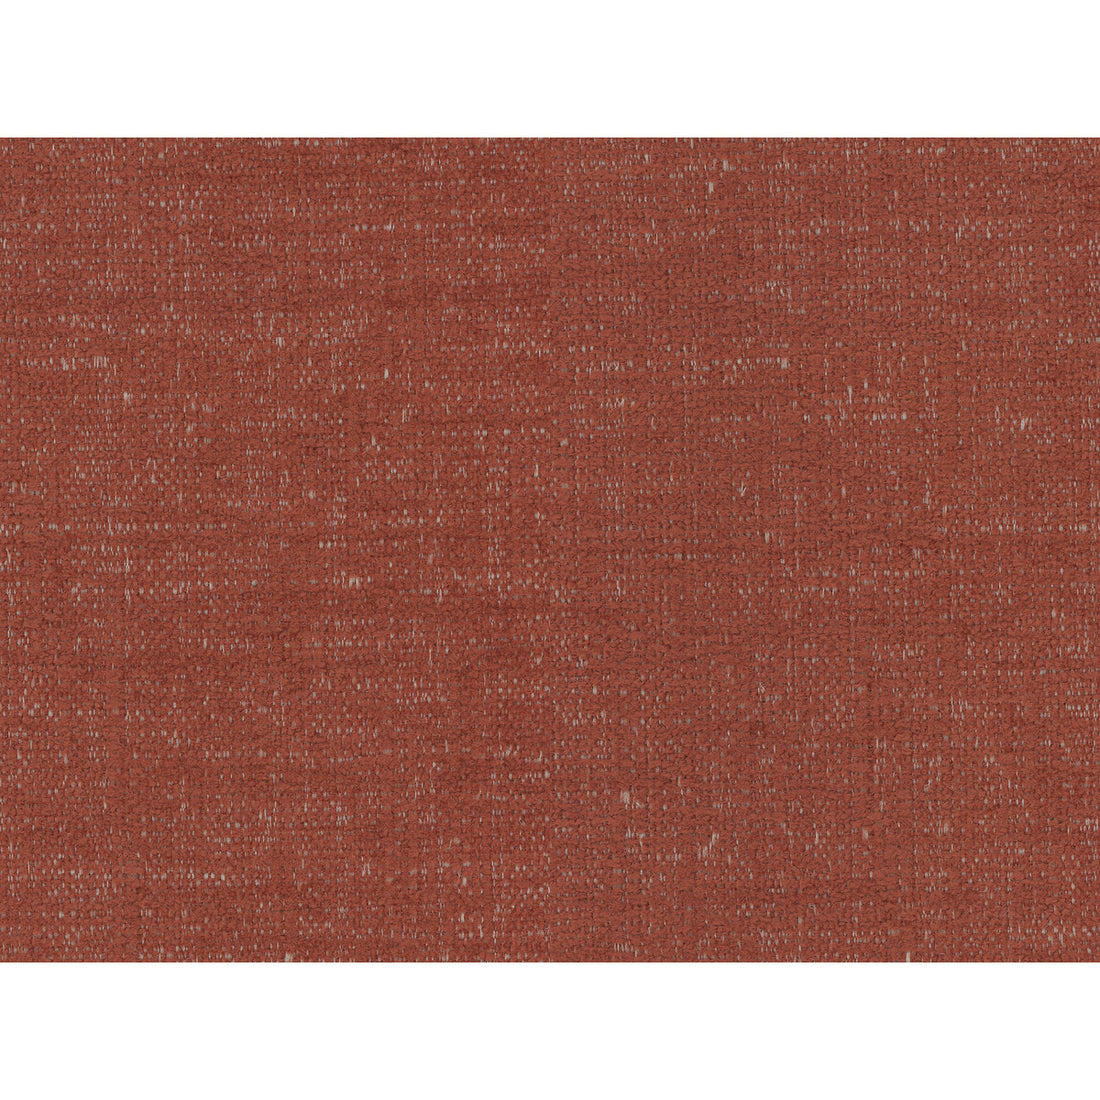 Kravet Contract fabric in 34636-24 color - pattern 34636.24.0 - by Kravet Contract in the Crypton Incase collection